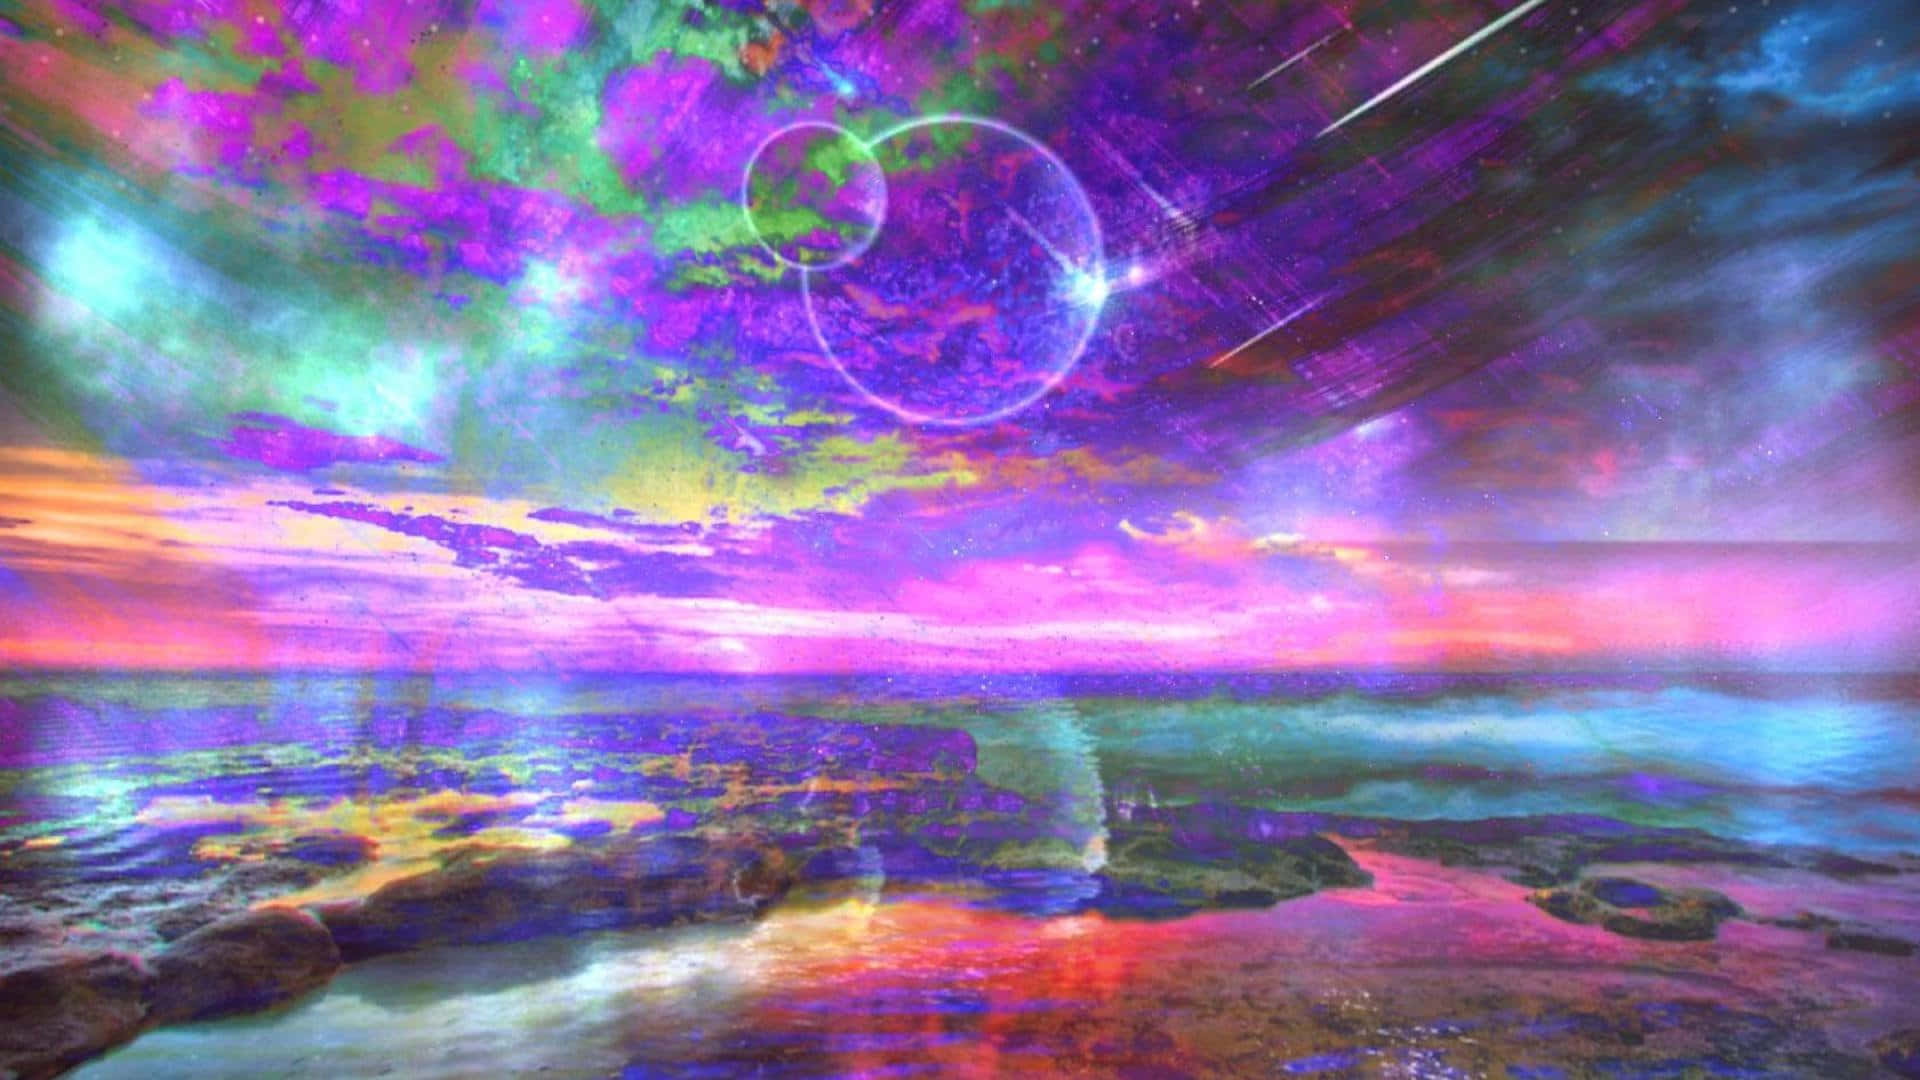 •  “Dive into a beautiful, ethereal psychedelic space” Wallpaper